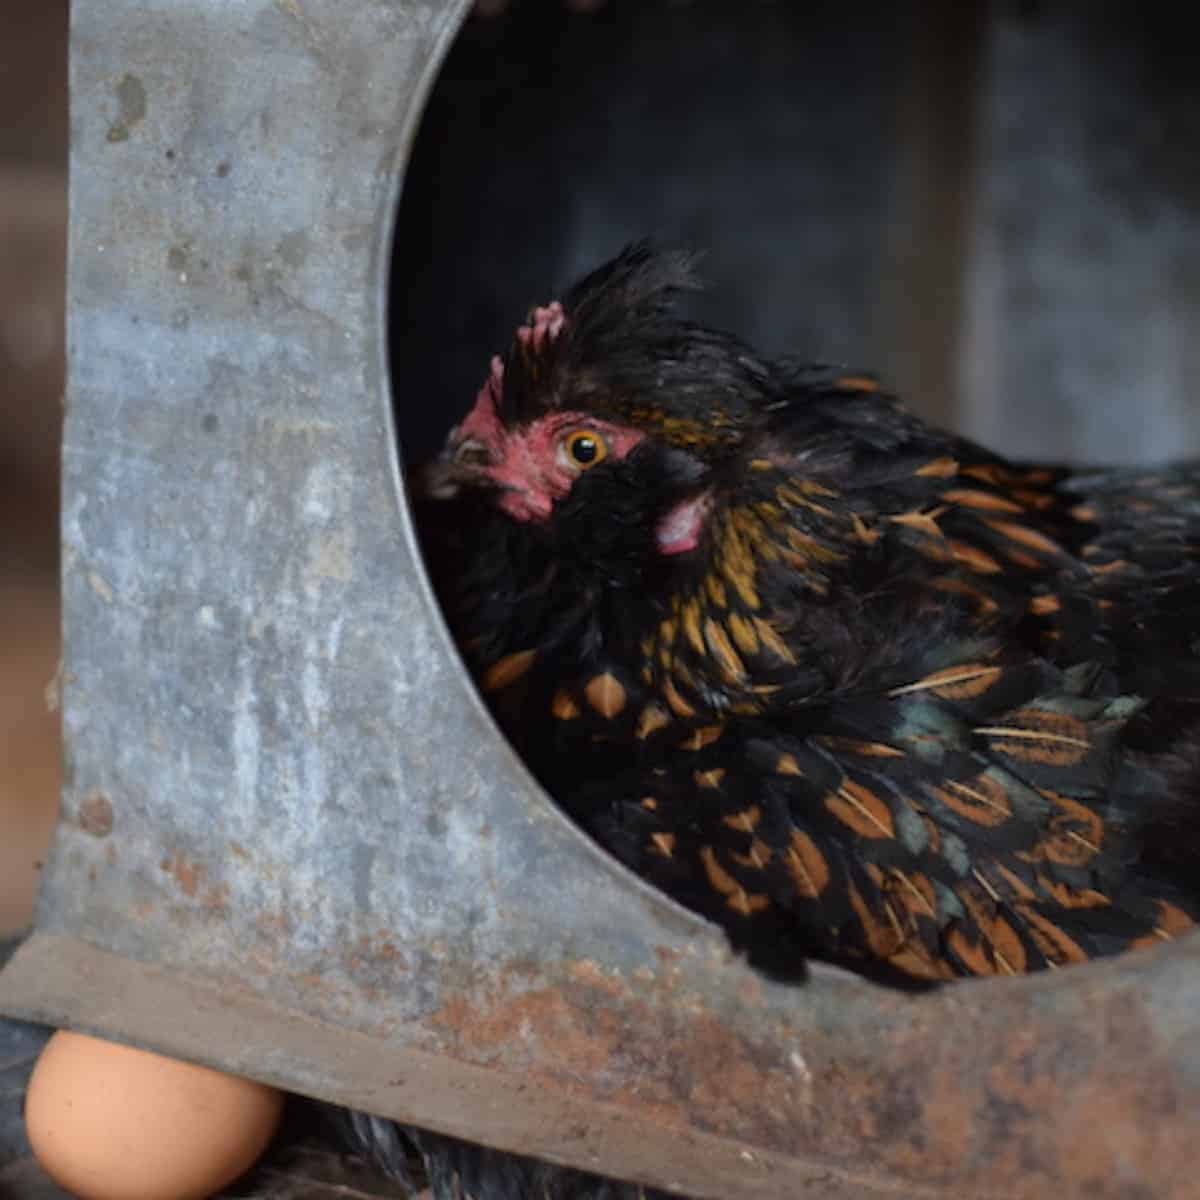 Raising Chickens - Resources to Get Started